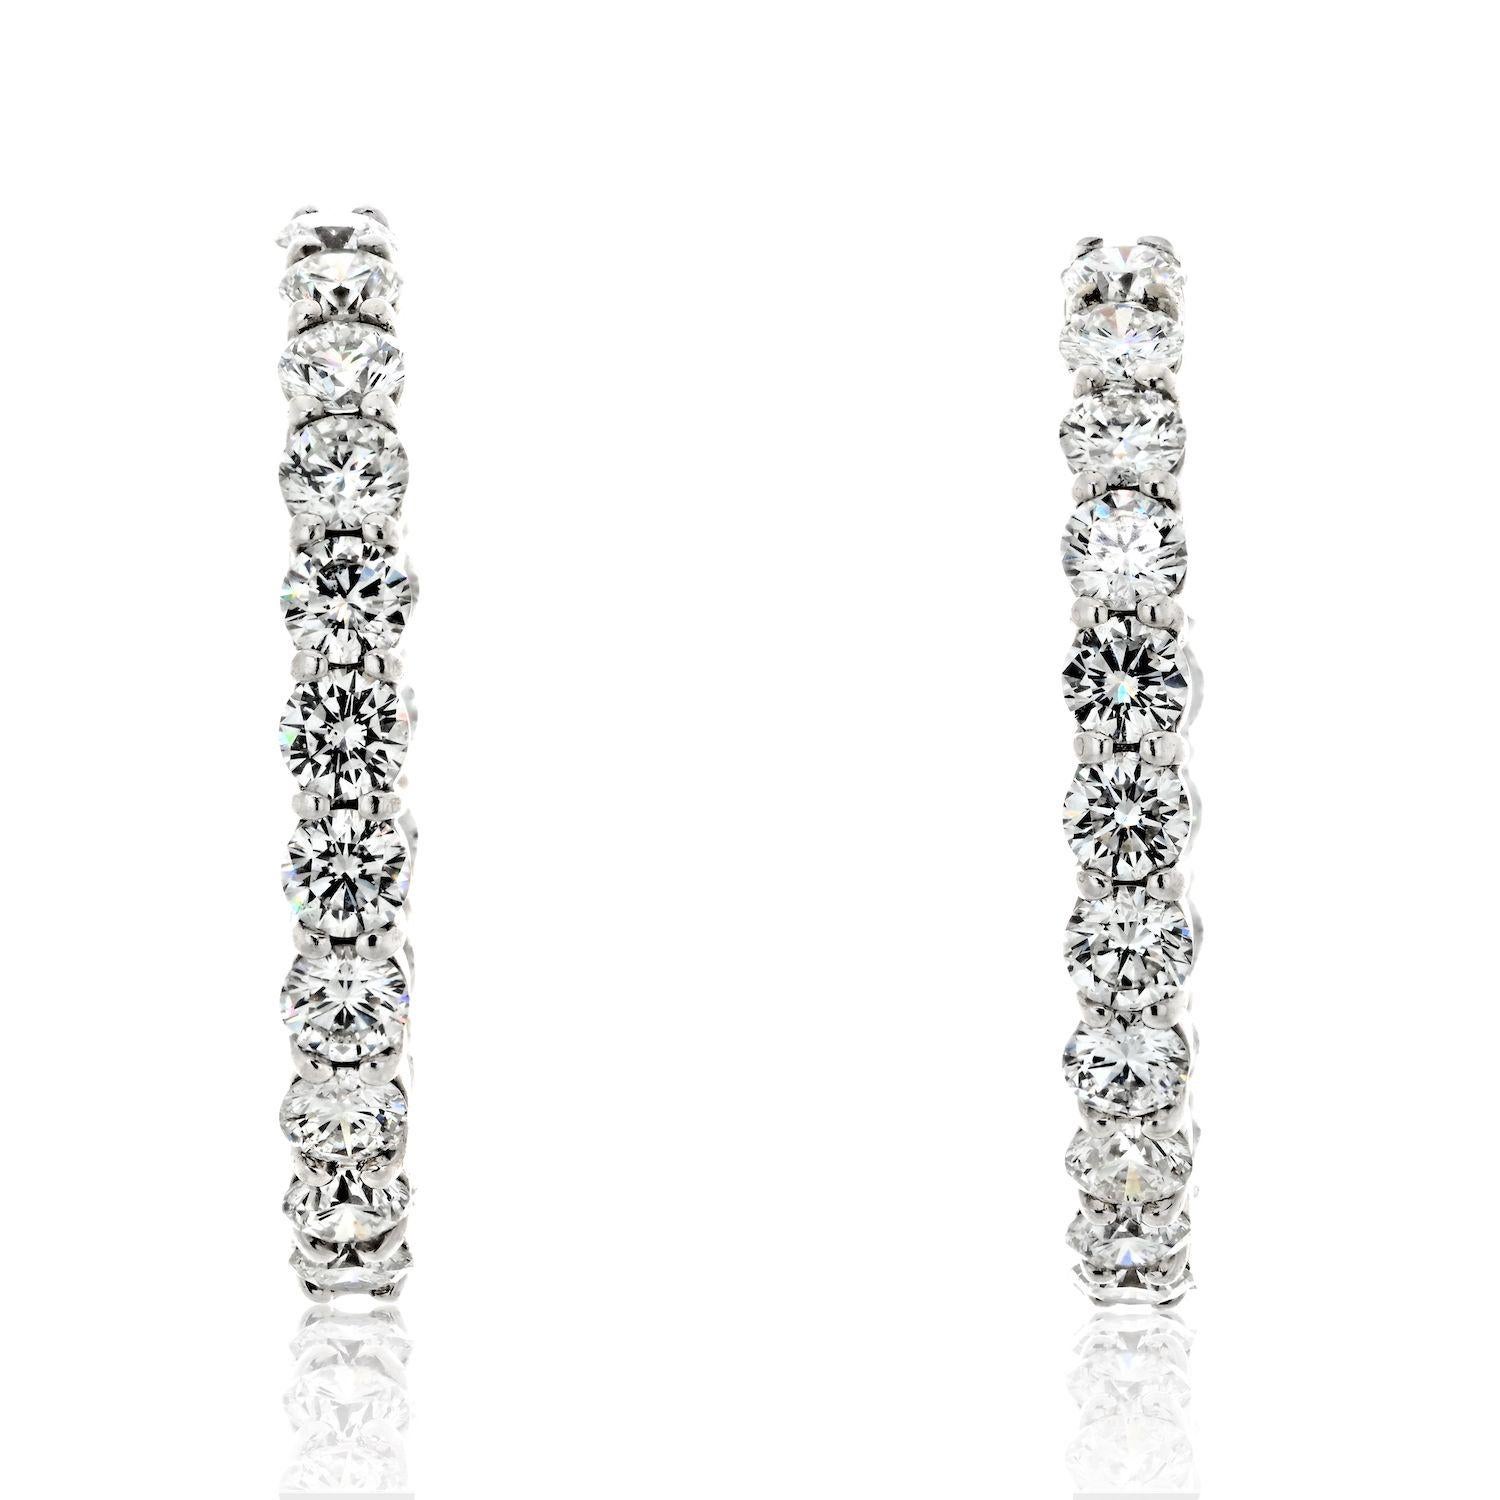 6.00cttw 18k White Gold Round Cut Diamond Hoop Earrings In Excellent Condition For Sale In New York, NY